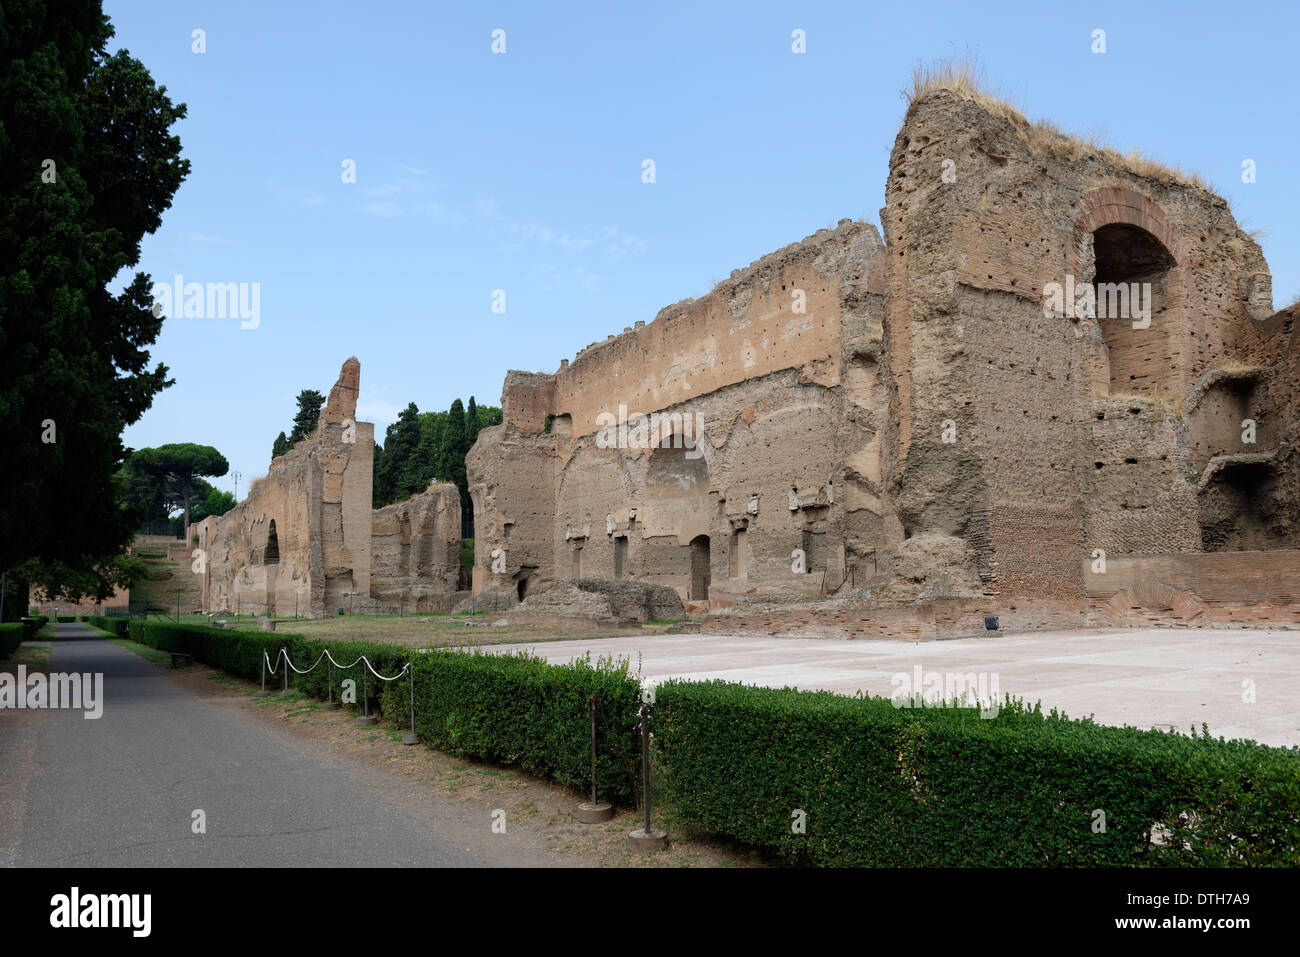 Ruins Gymnasia with exedra Study Rooms in outer west wall Baths Caracalla Rome Italy Baths of Stock Photo